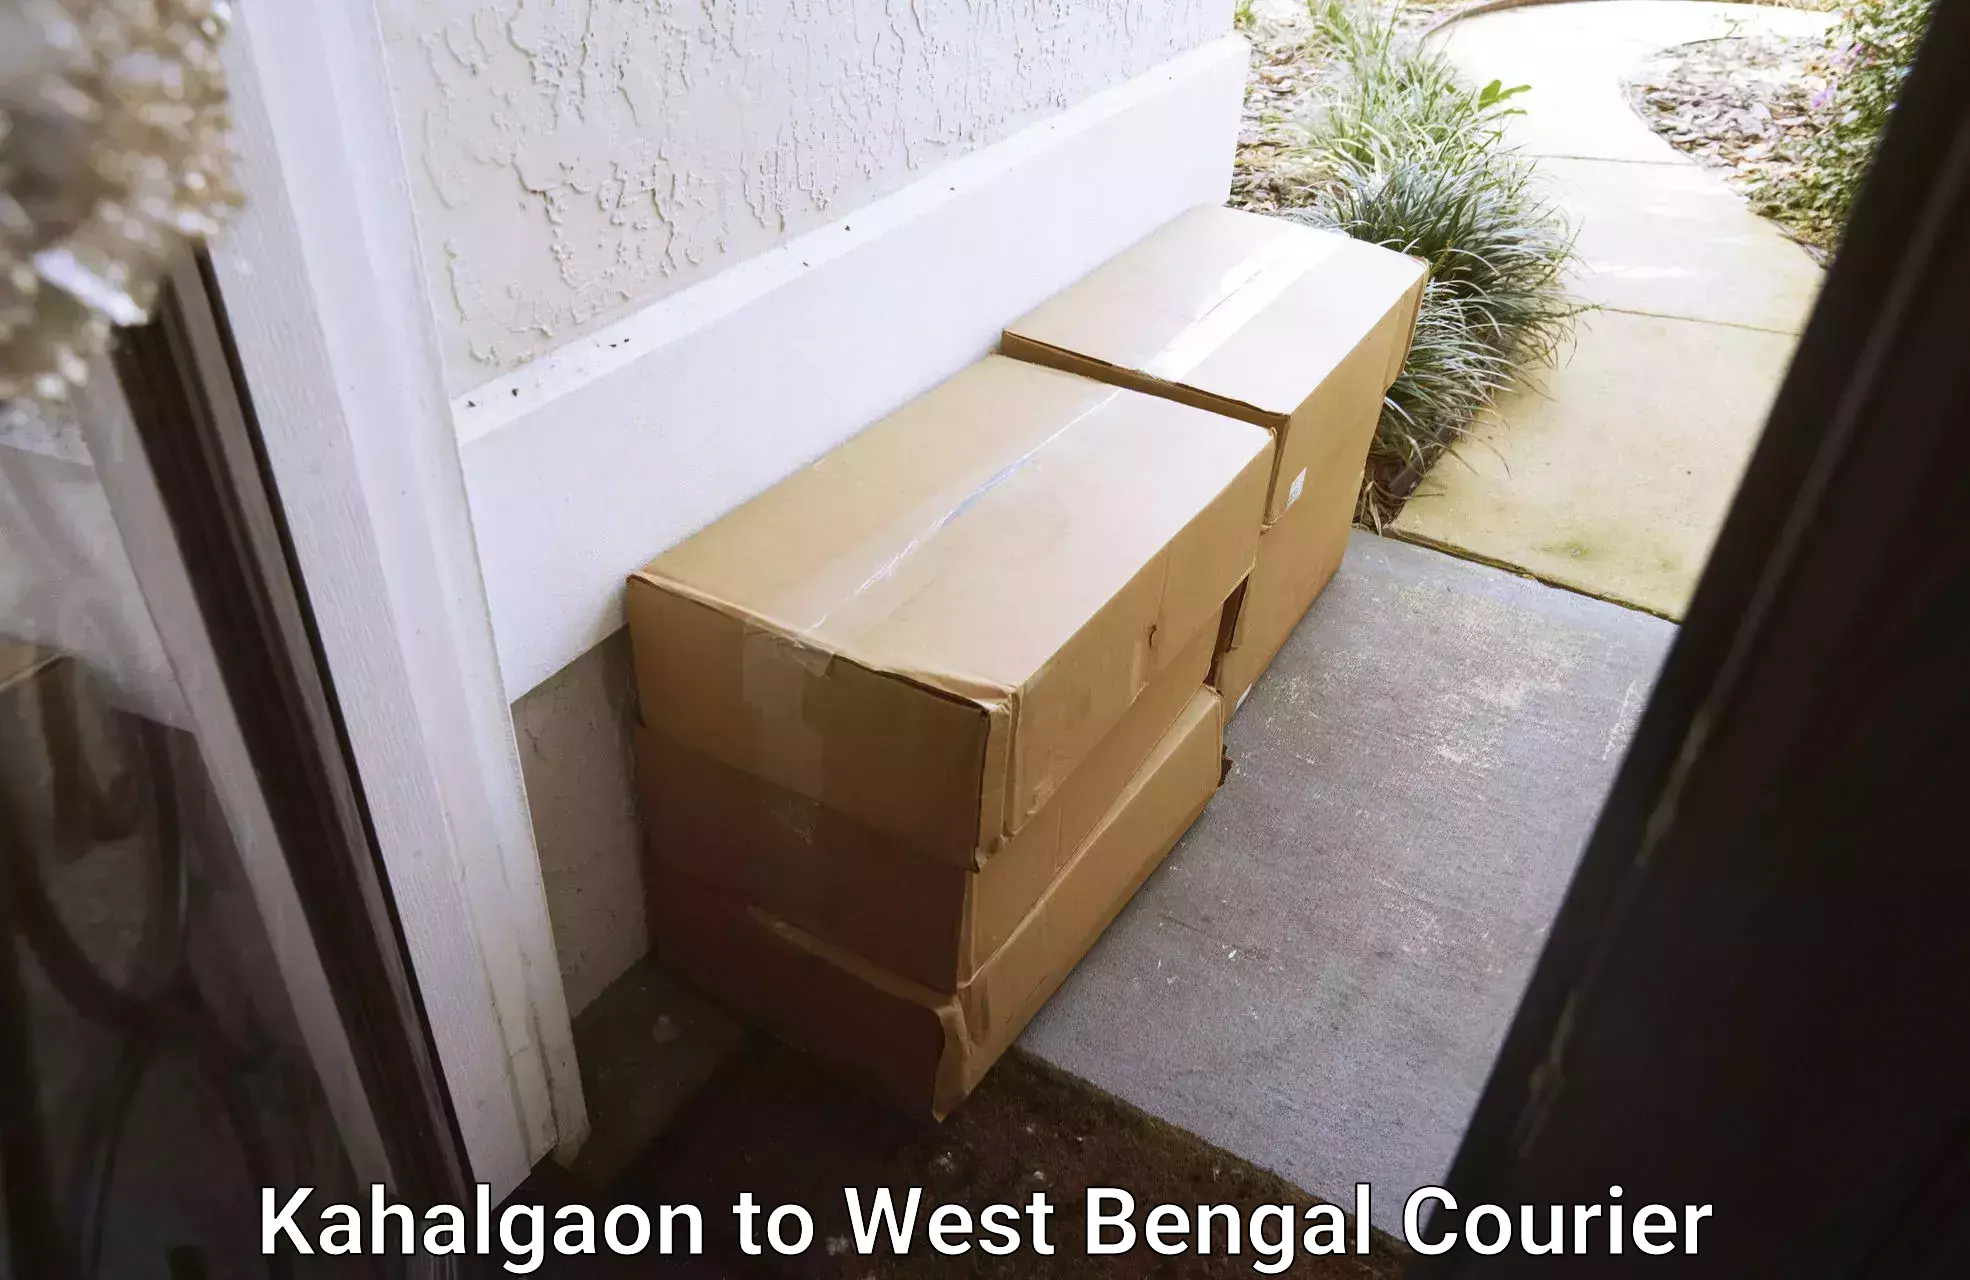 Trusted moving company Kahalgaon to West Bengal